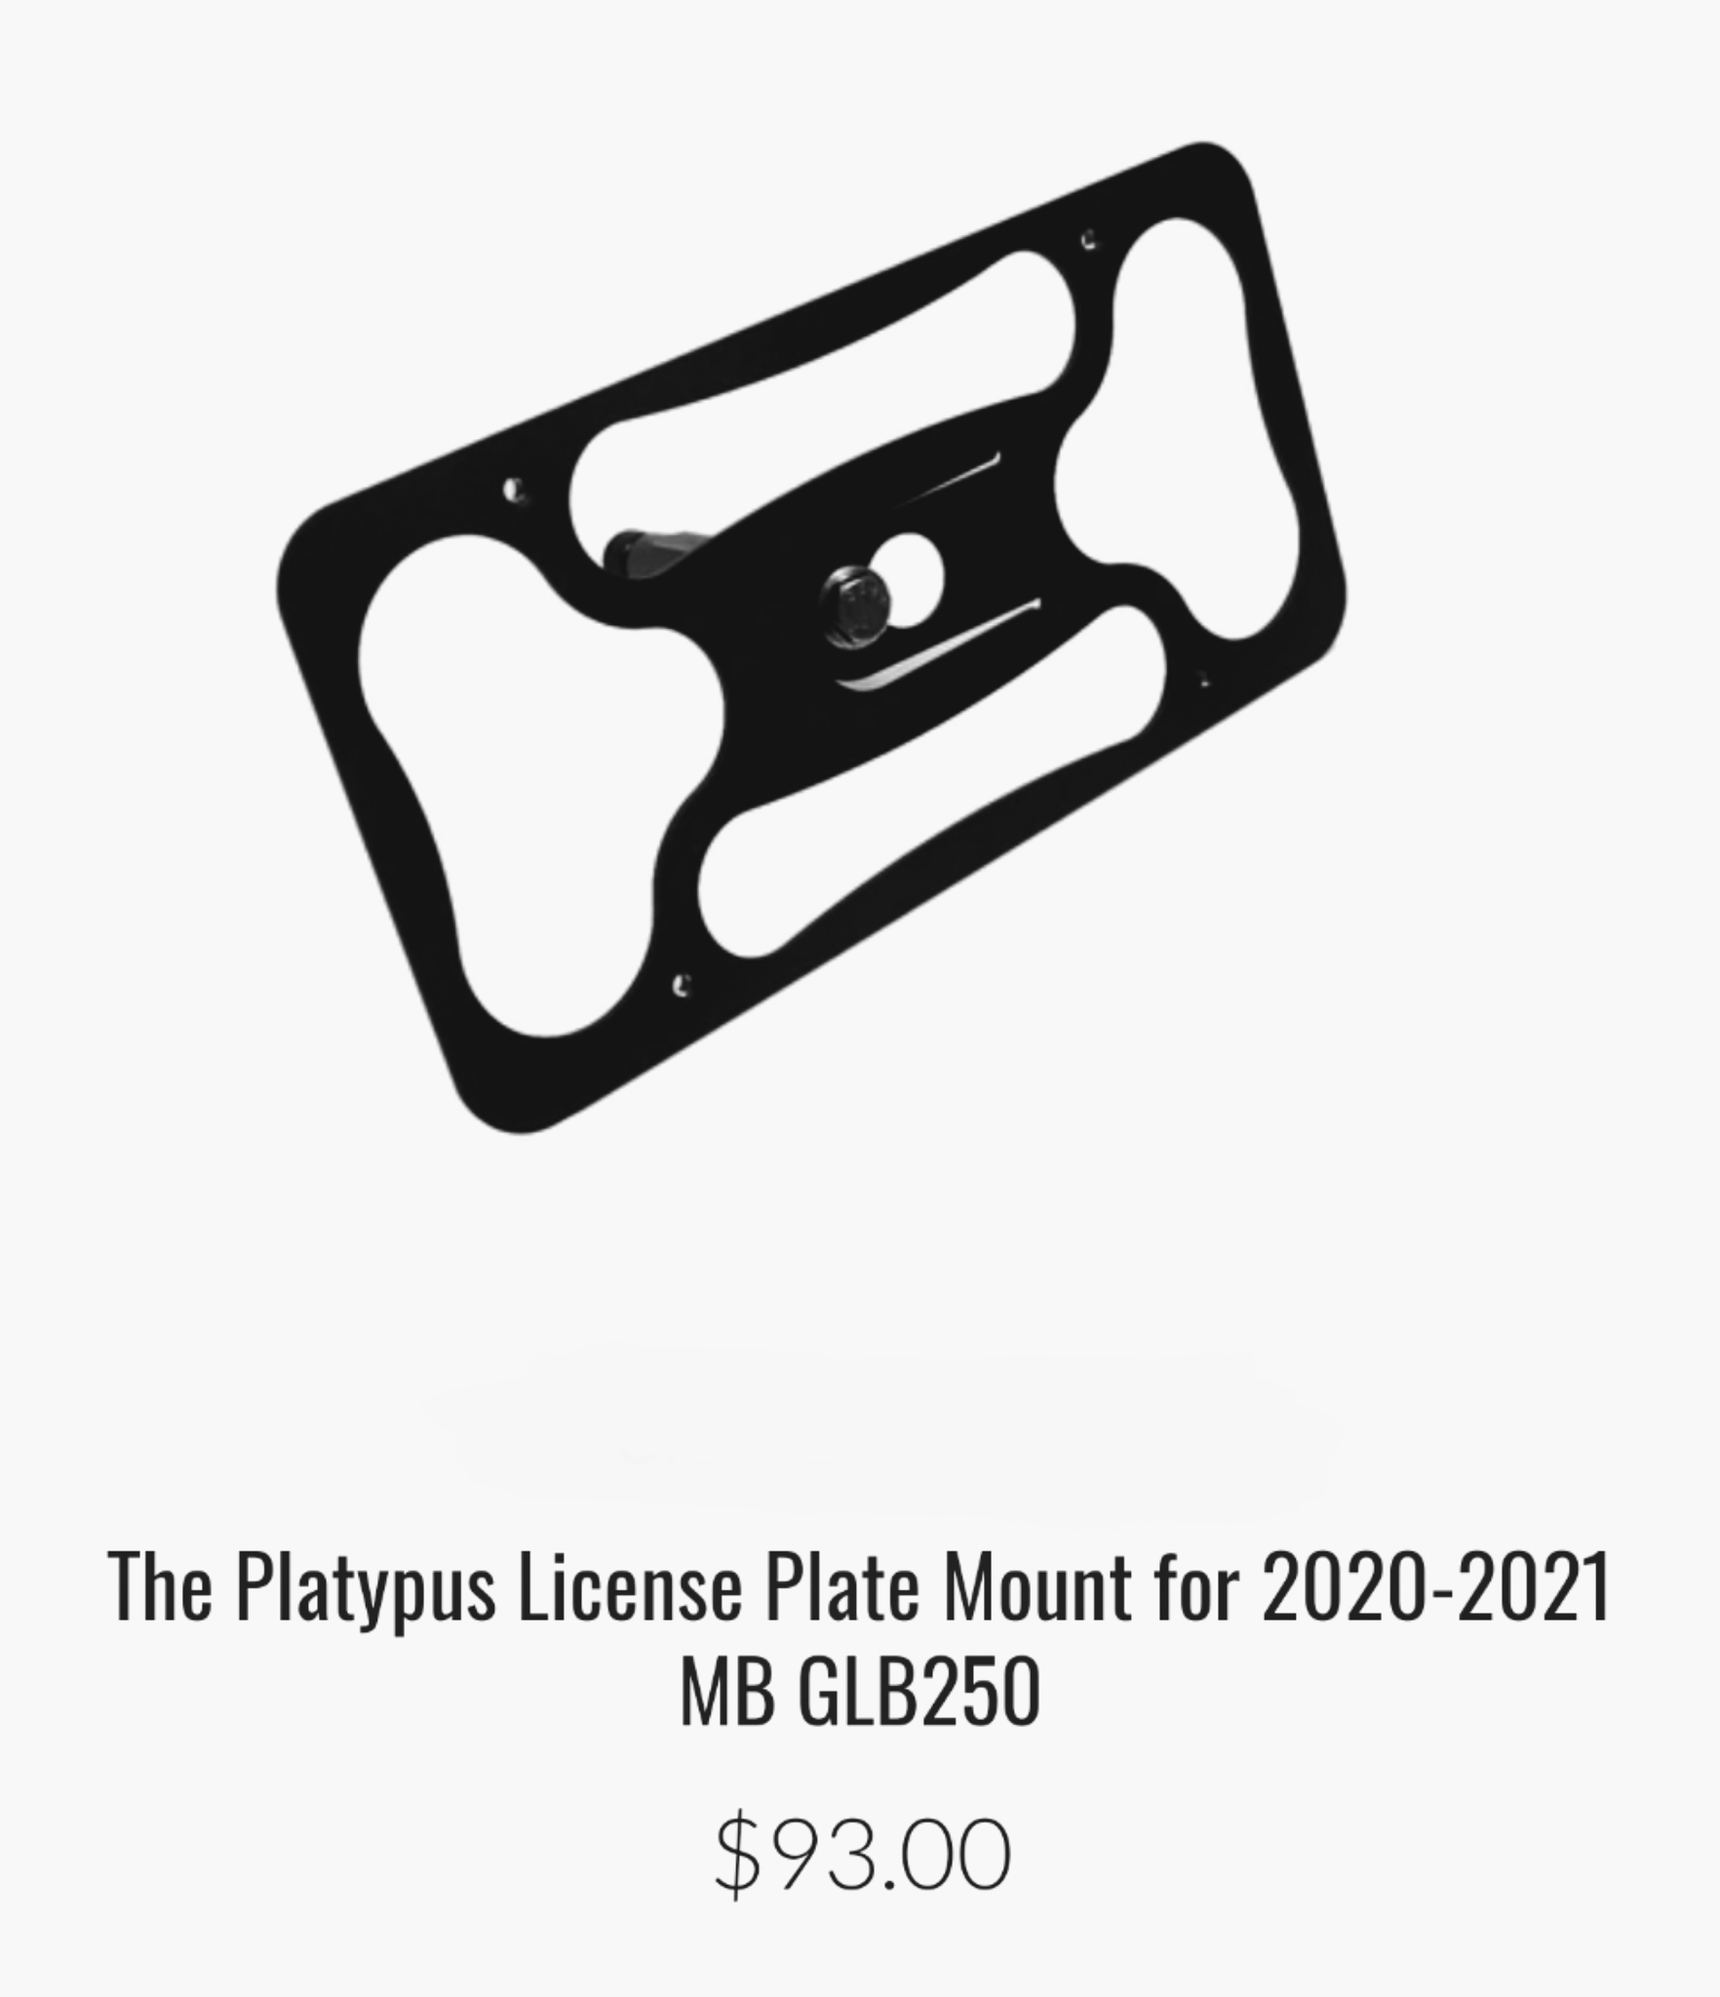 The Platypus License Plate Mount